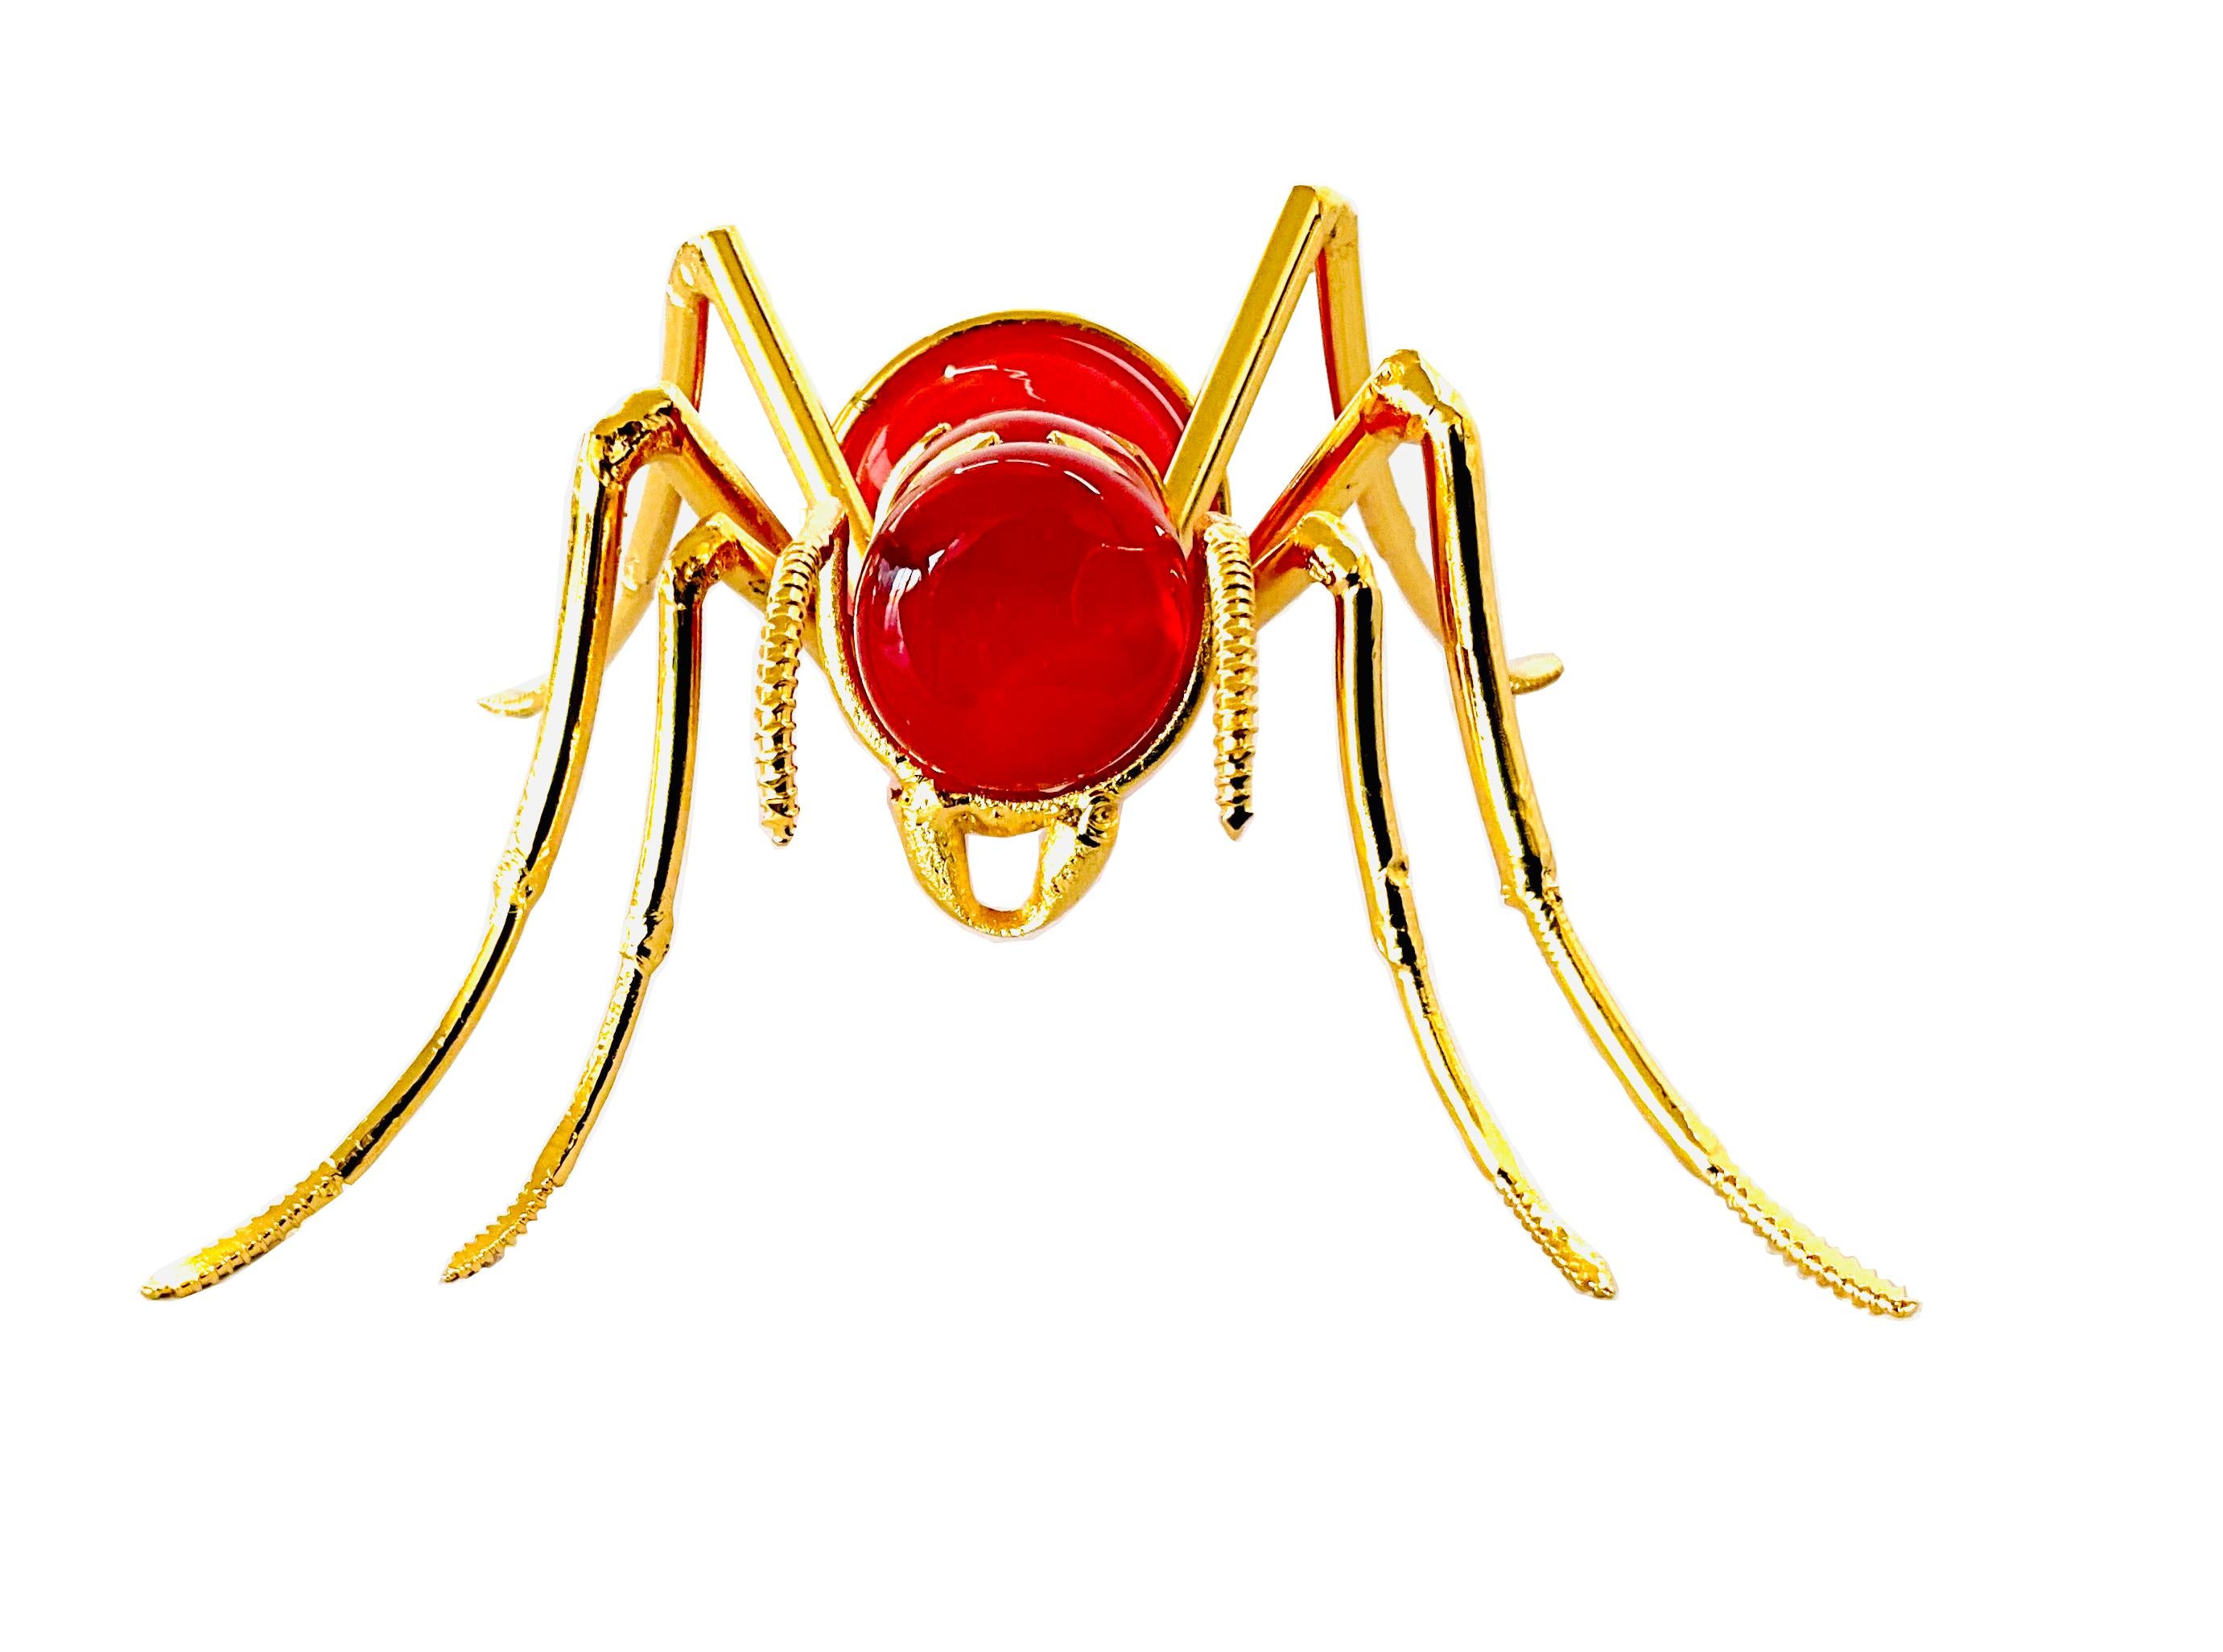 Hand-Blown Glass Ant Gold Plated Recycled Industrial Iron and Red Crystal Parts  - Sculpture by Marcos Romero Gallardo